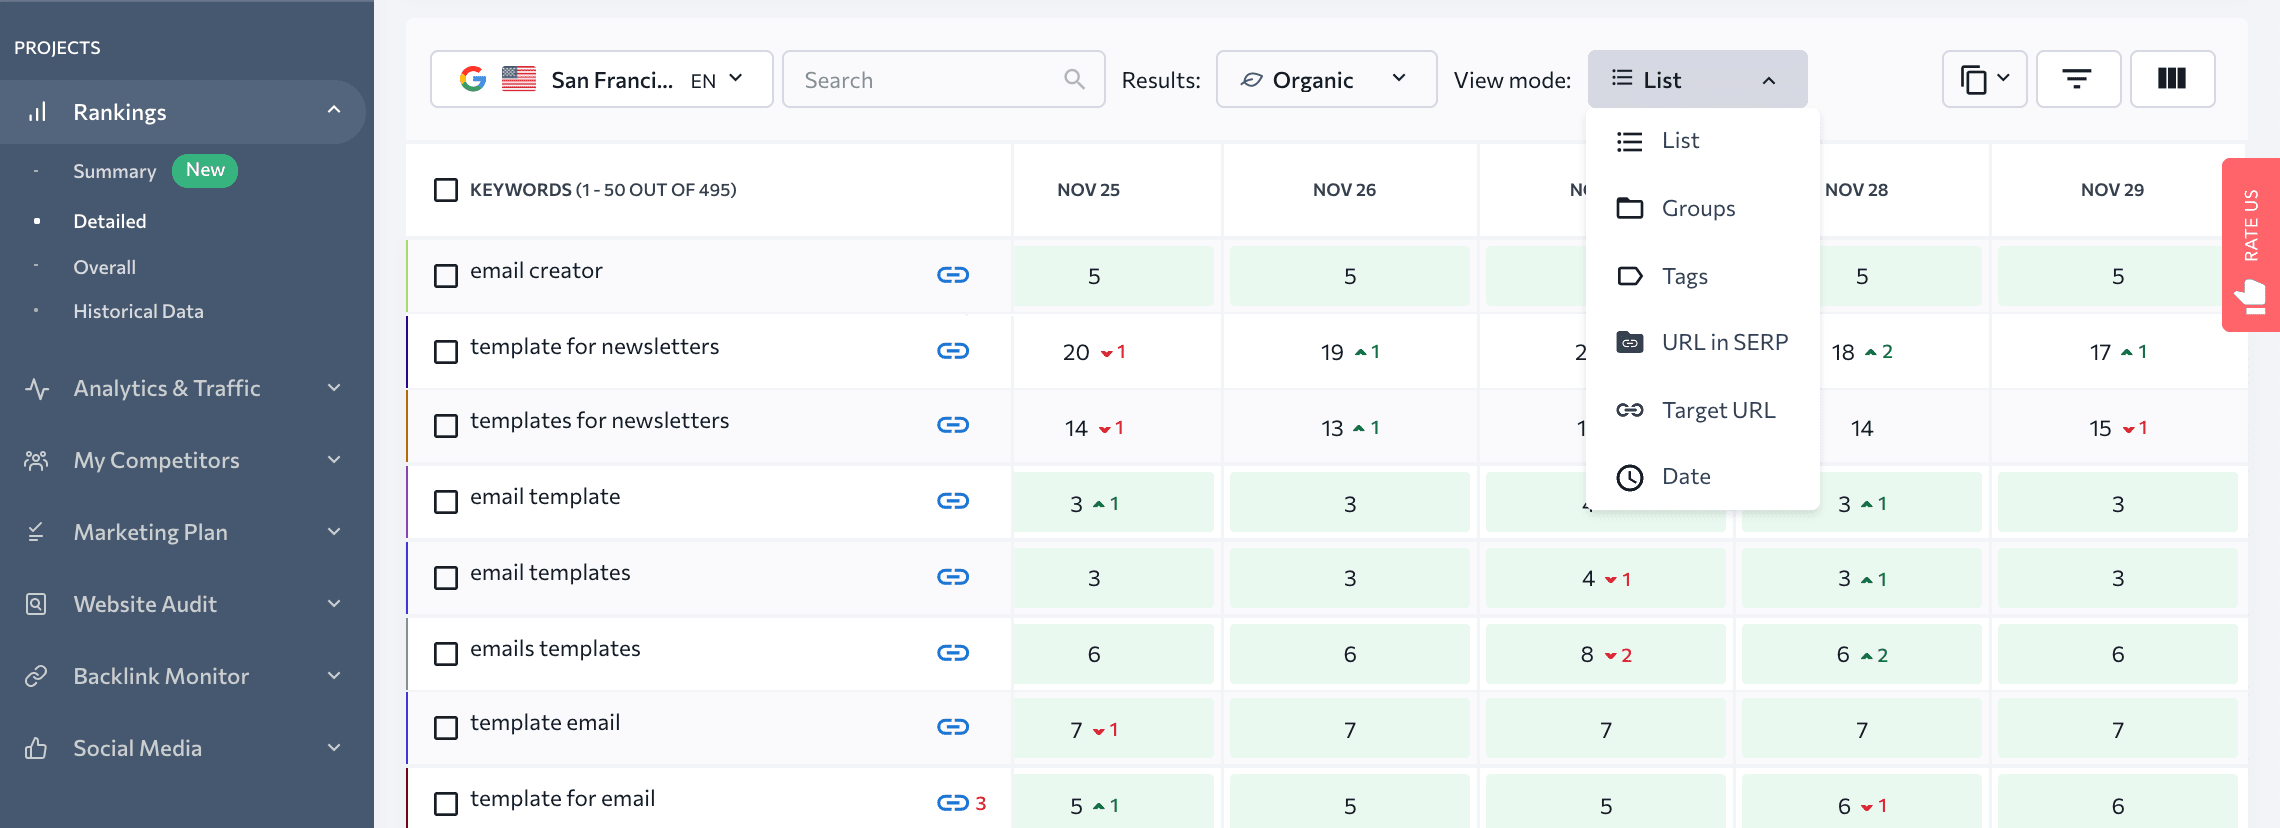 The List view mode in the Rankings table